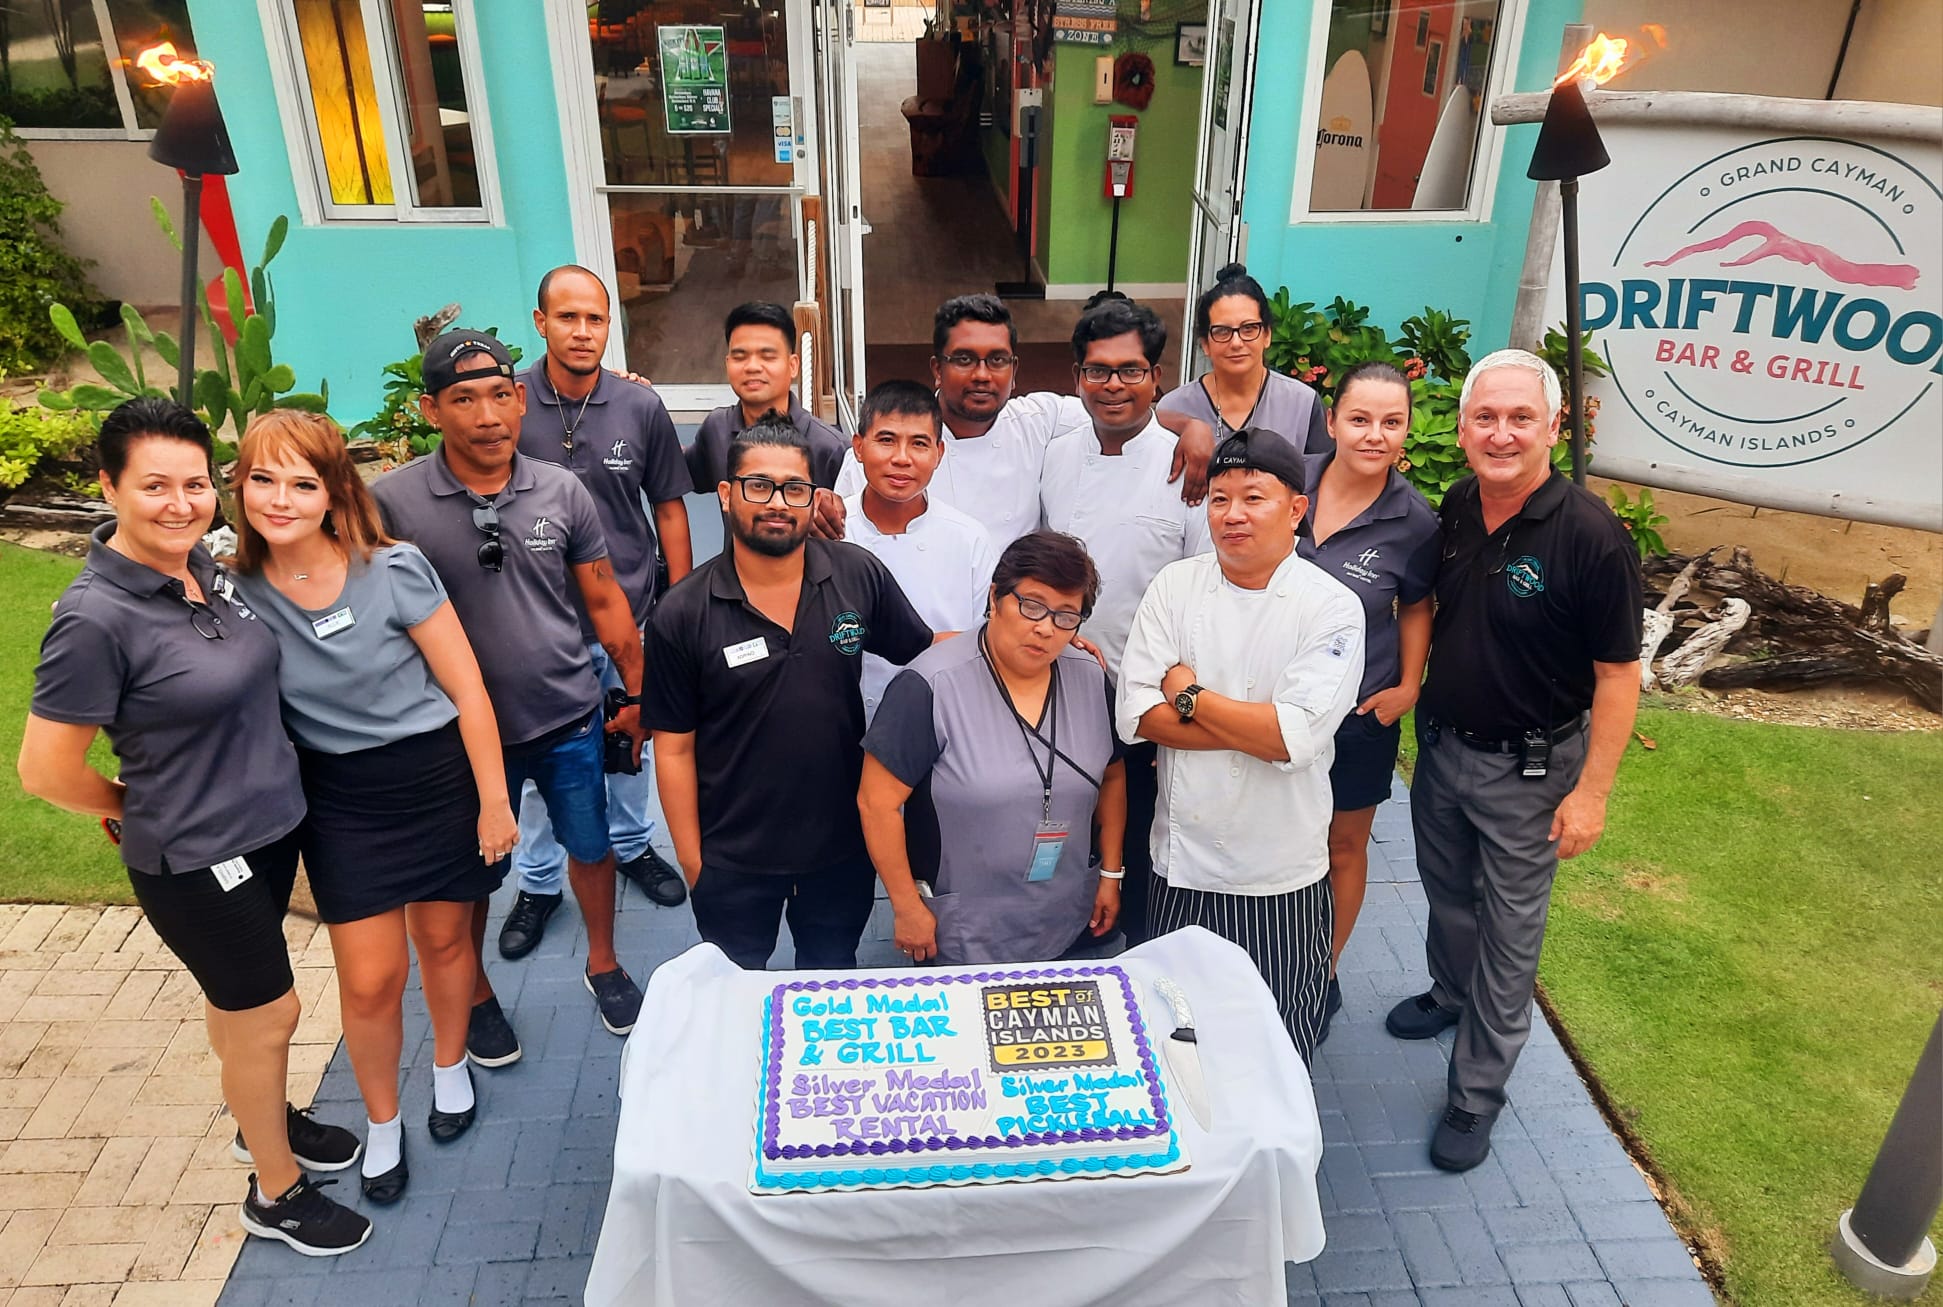 Staff at Driftwood Bar & Grill at The Grand Caymanian Resort posing near a cake celebrating their restaurant's recent Best of Grand Cayman 2023 gold award.